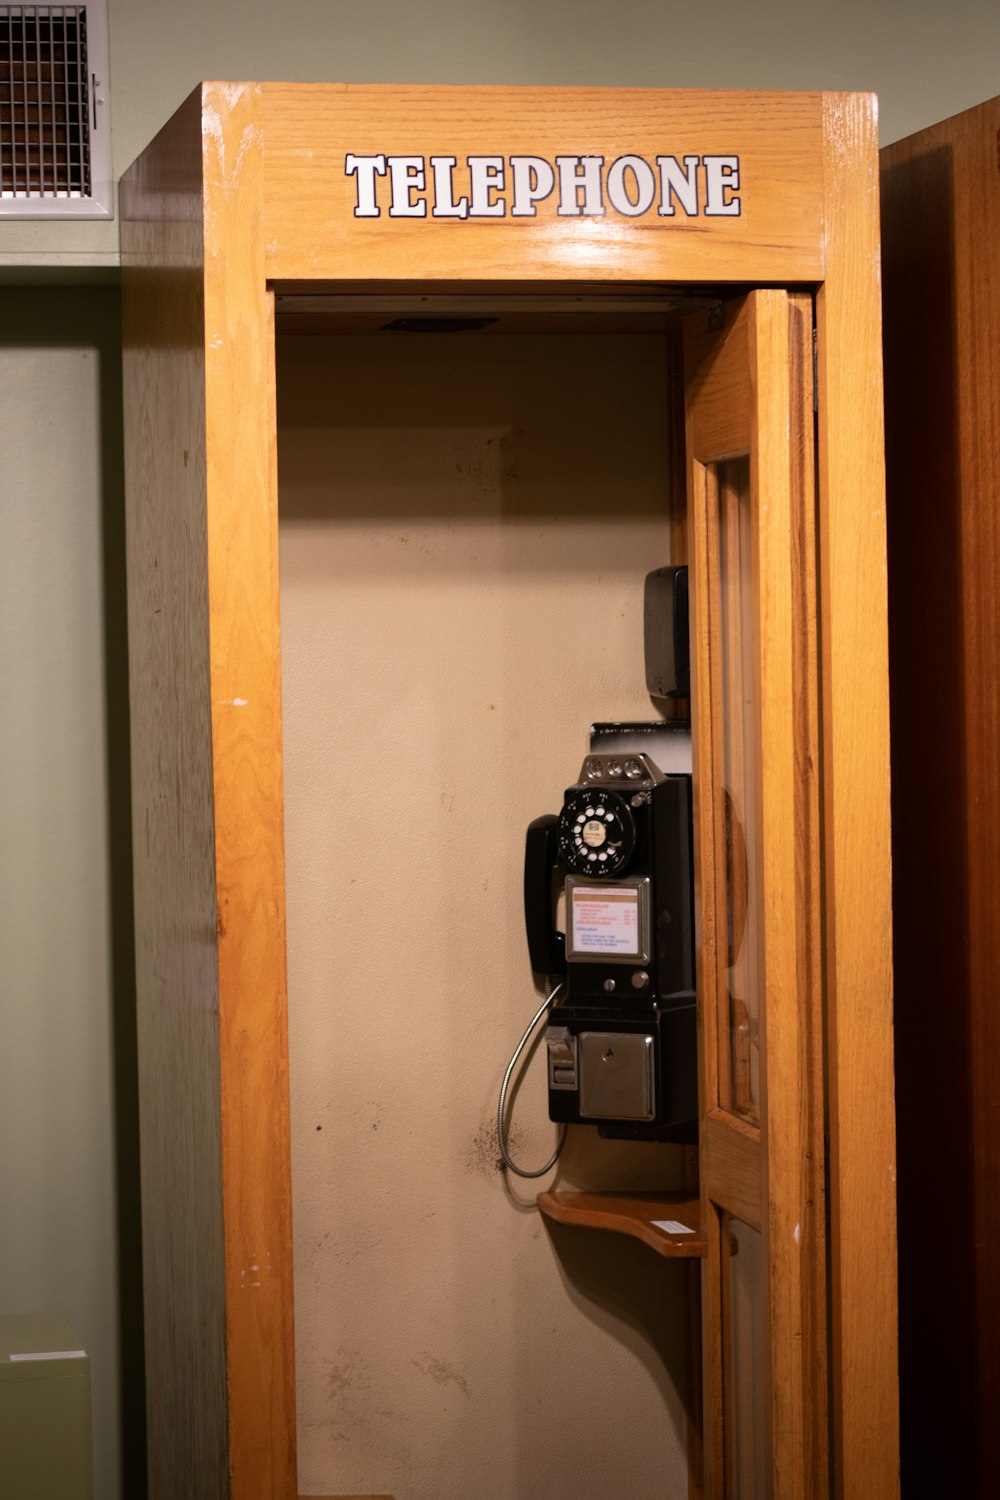 a telephone in a wooden cabinet